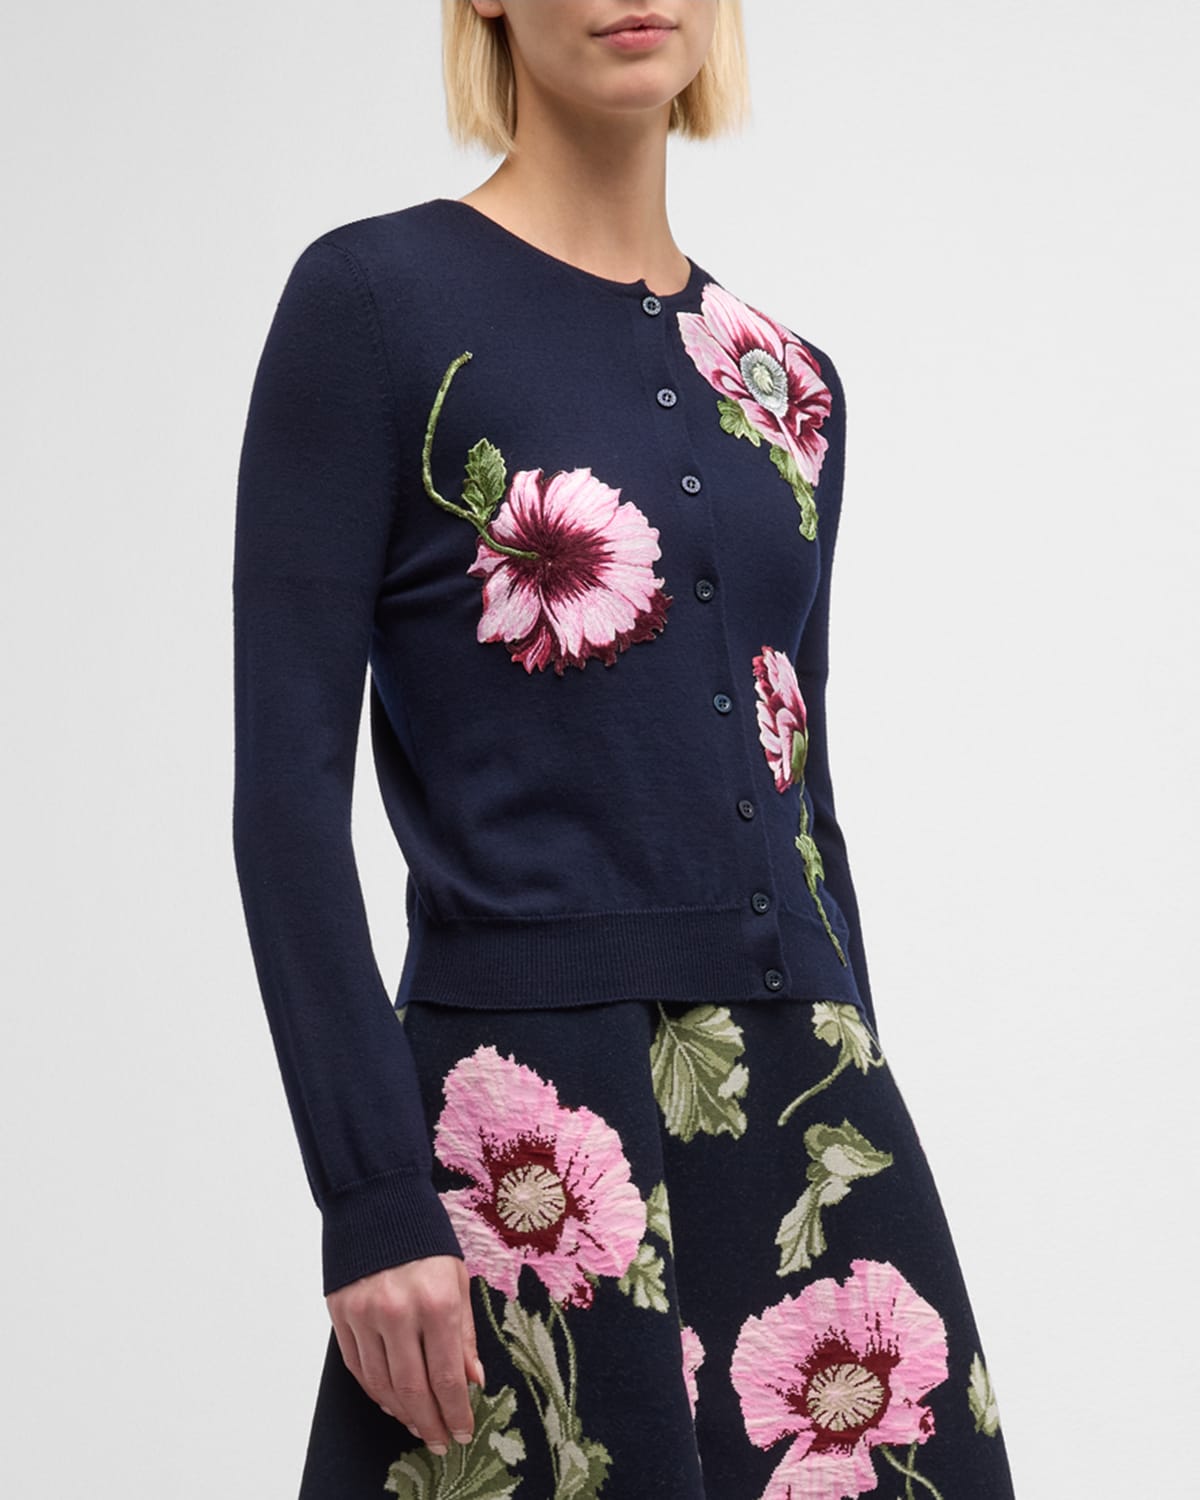 Oscar De La Renta Wool Knit Cardigan With Threadwork Embroidered Poppies In Navy Pink